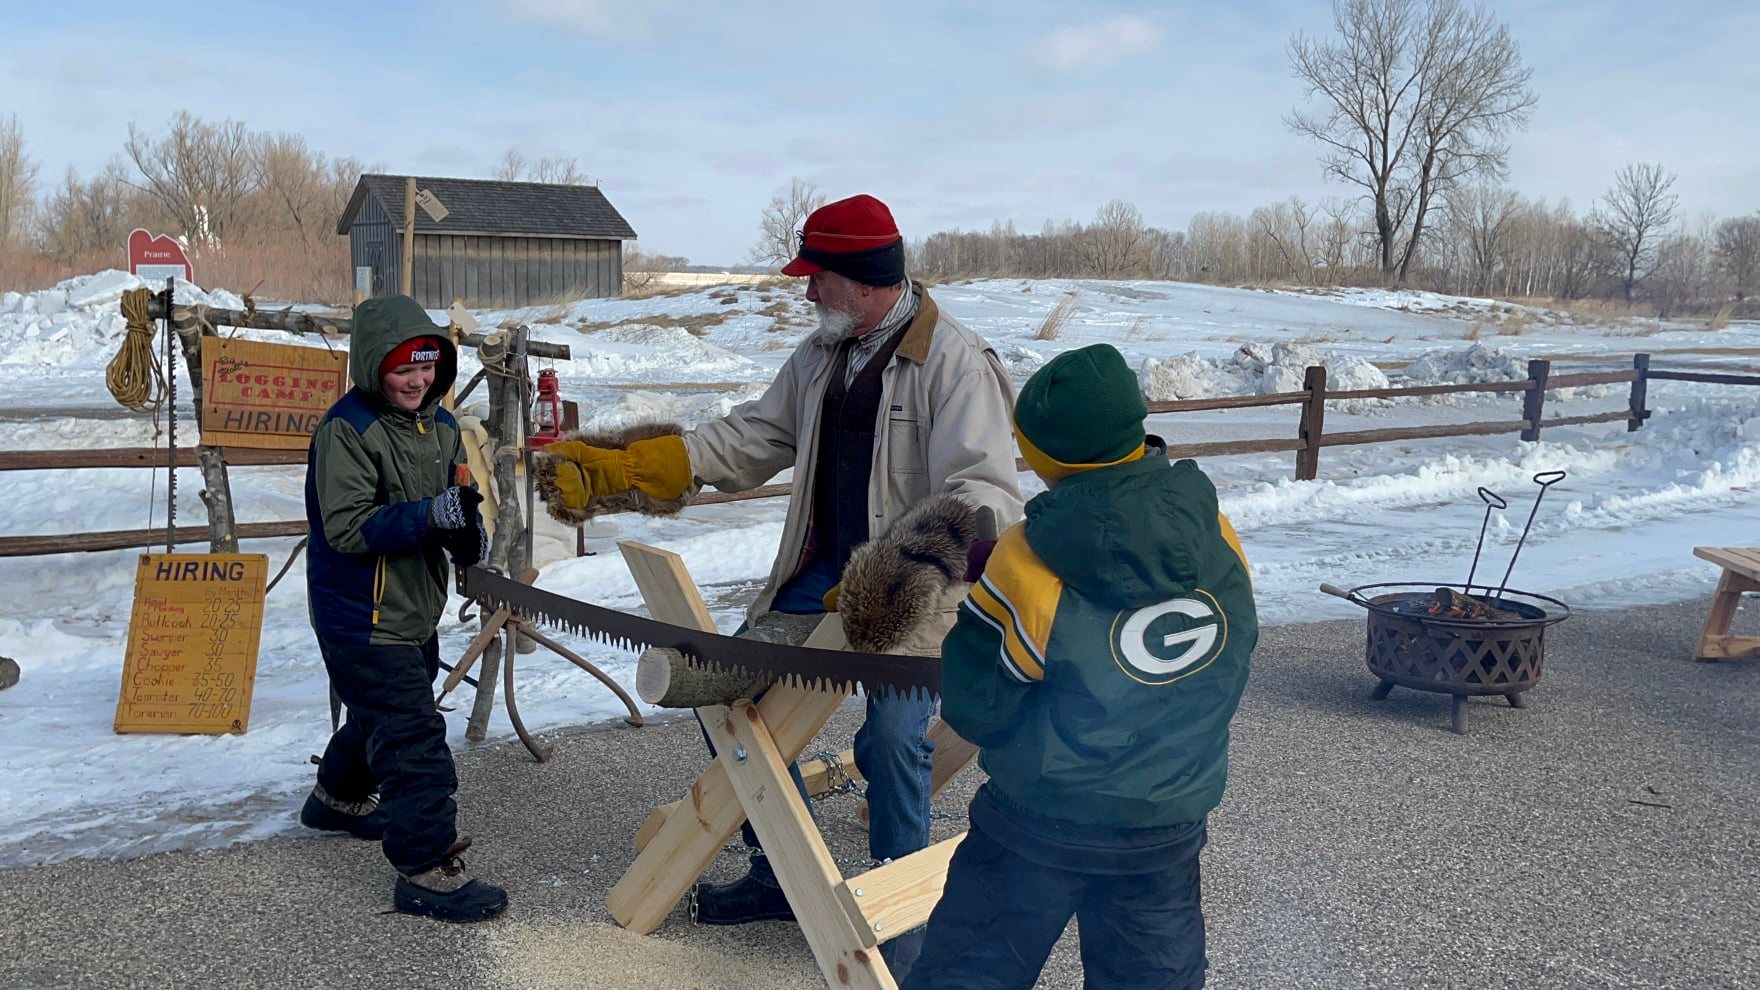 Boys sawing log with 2-person saw with older man supervising.